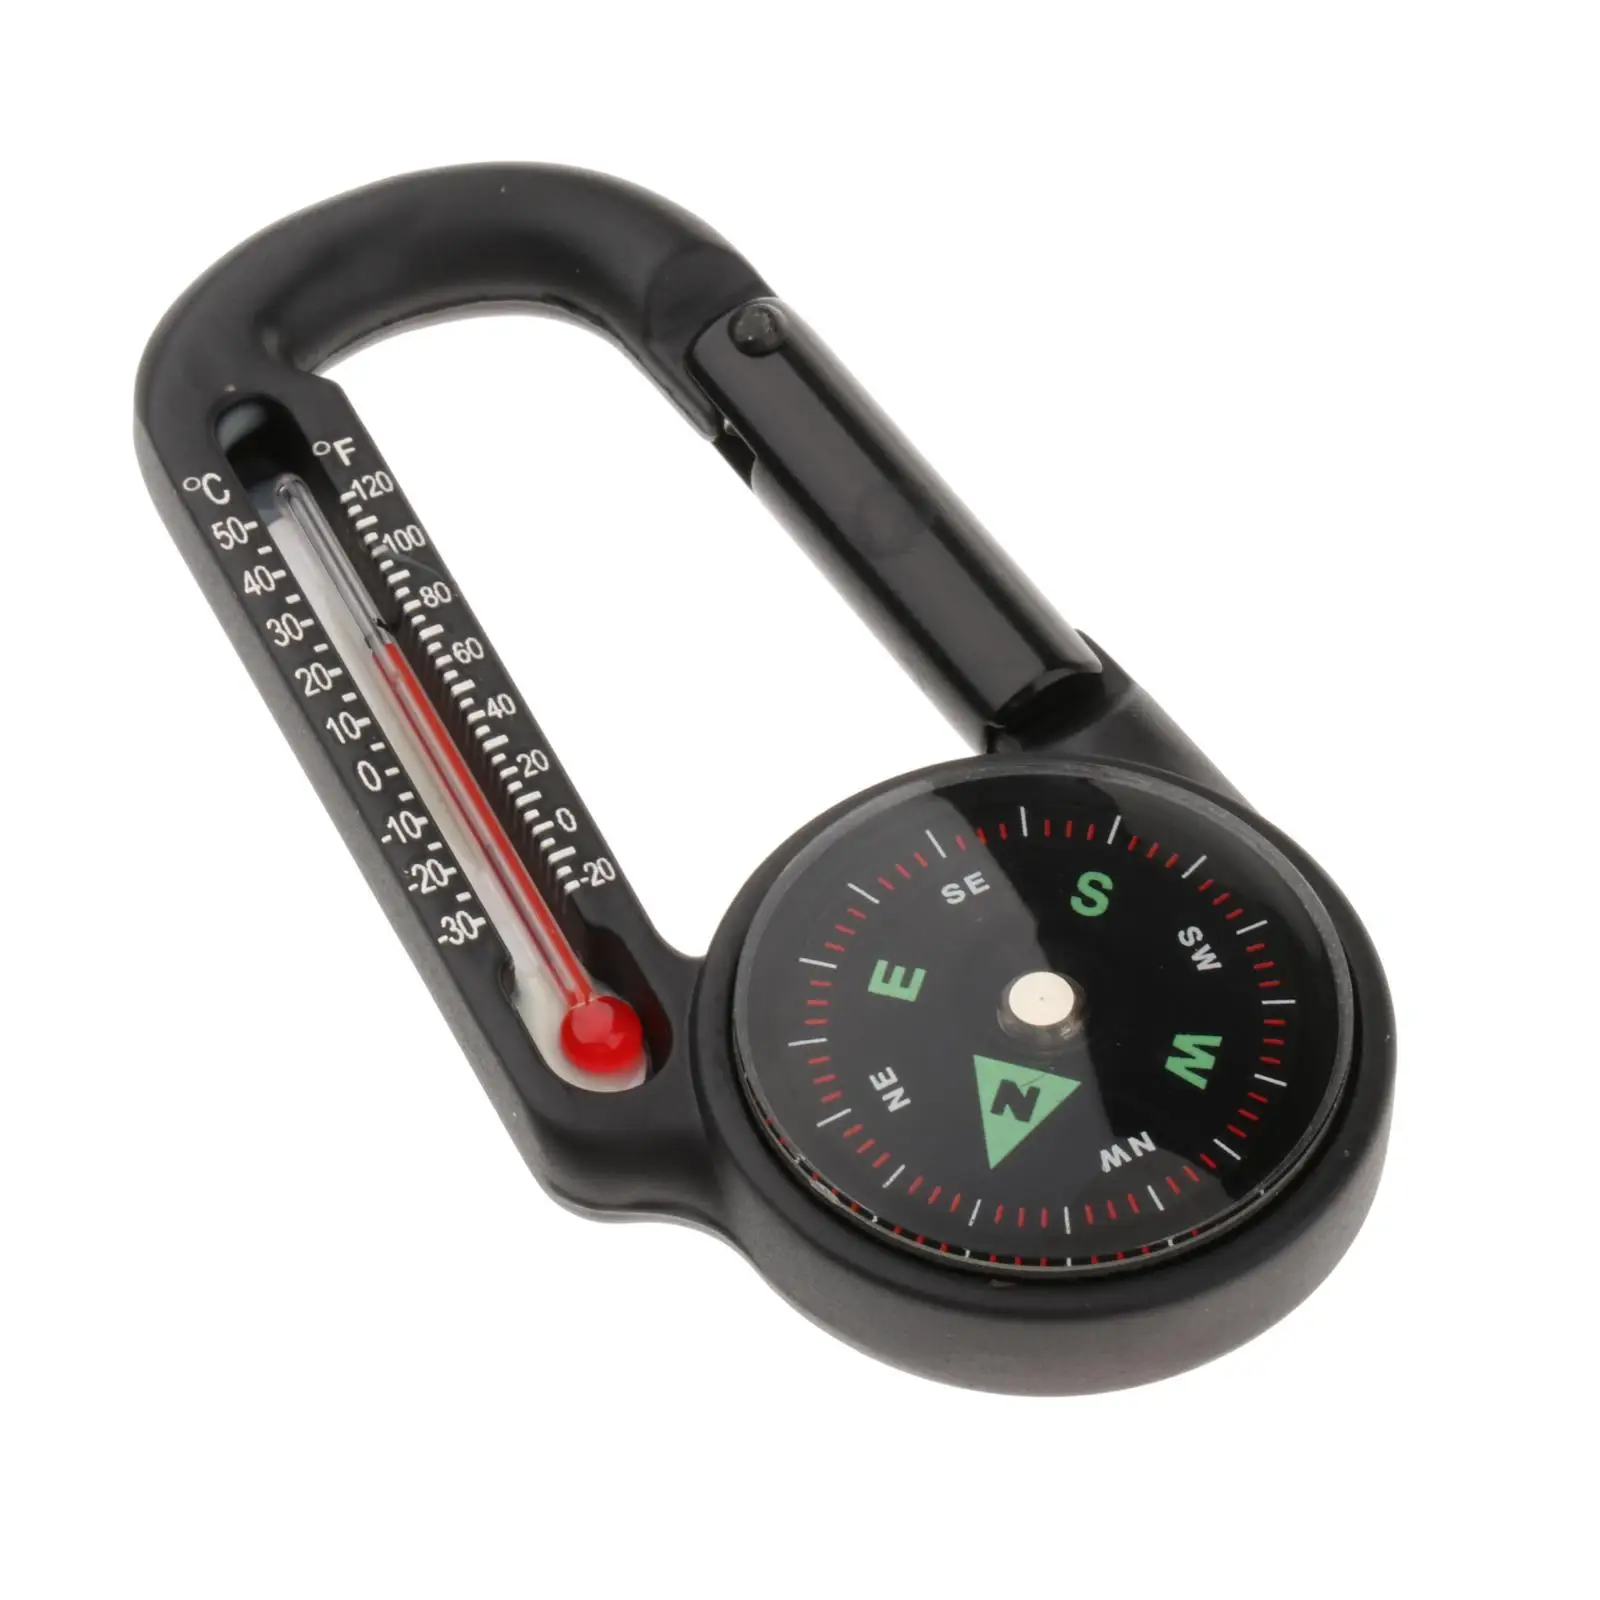 Outdoor Sport Keychain Carabiner Travel Hiking Compass Thermometer Survival Tool 